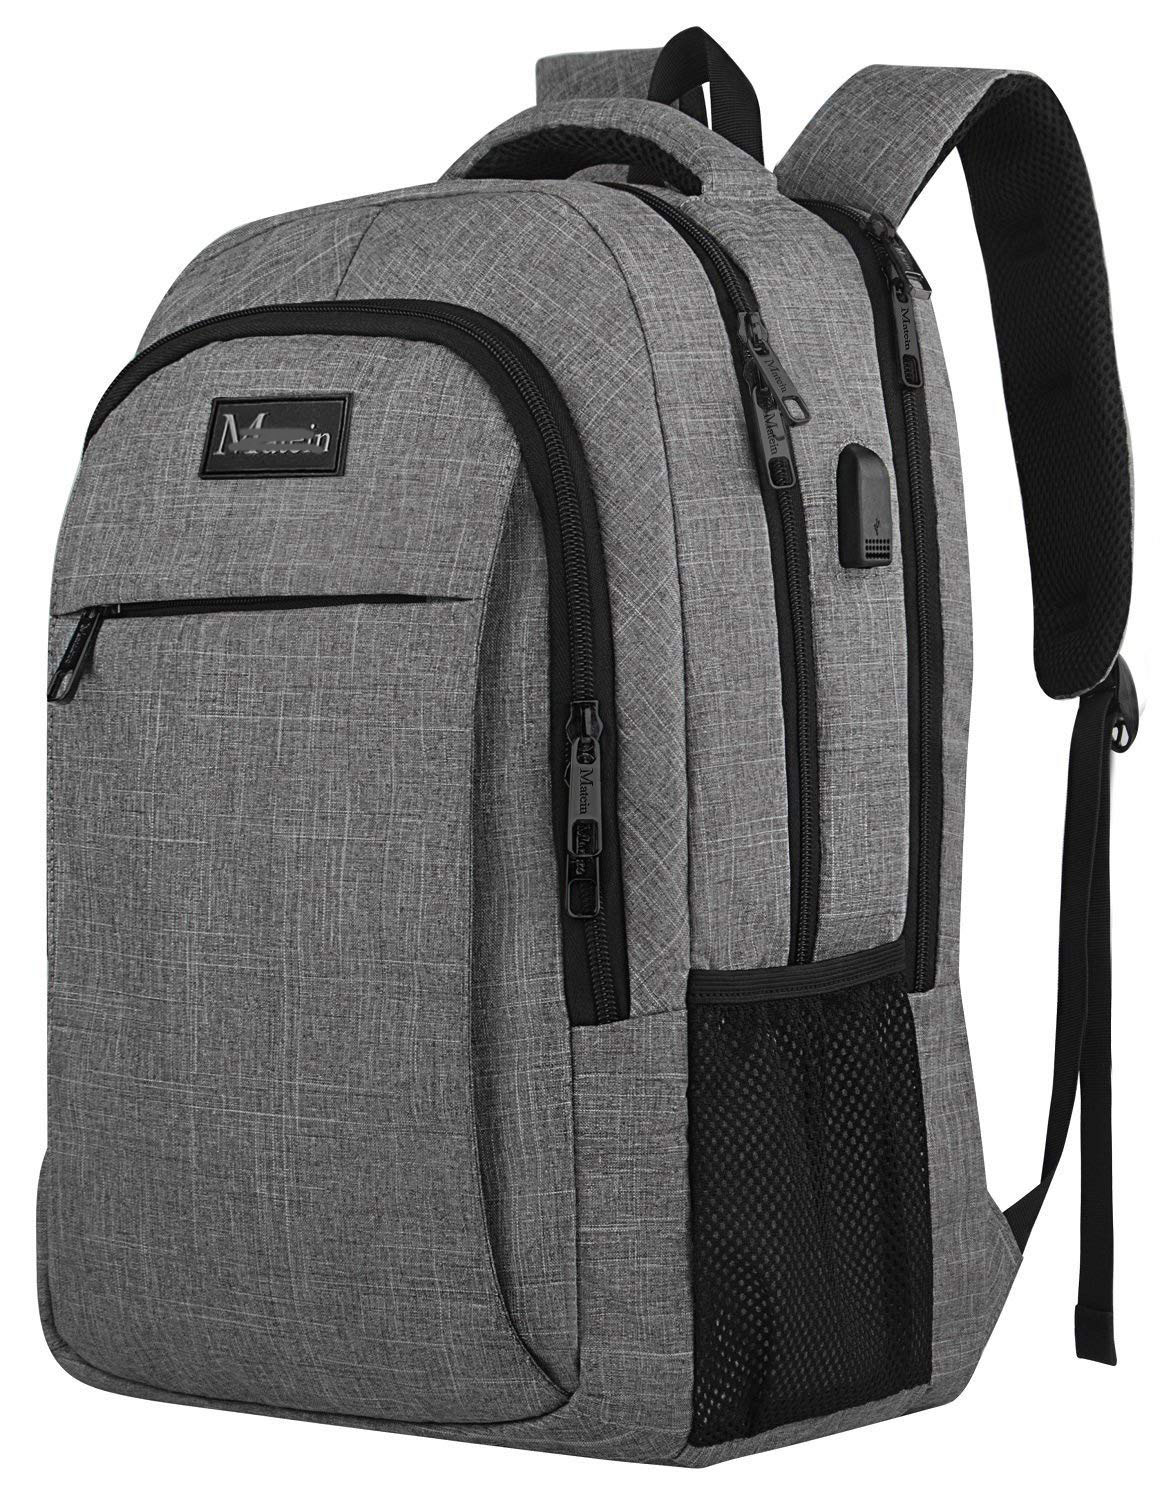 Travel Laptop Backpack,Business Anti Theft Slim Durable Laptops Backpack with USB Charging Port,Water Resistant College School Computer Bag for Women & Men Fits 15.6 Inch Laptop and Notebook – Grey  OEM ODM factory